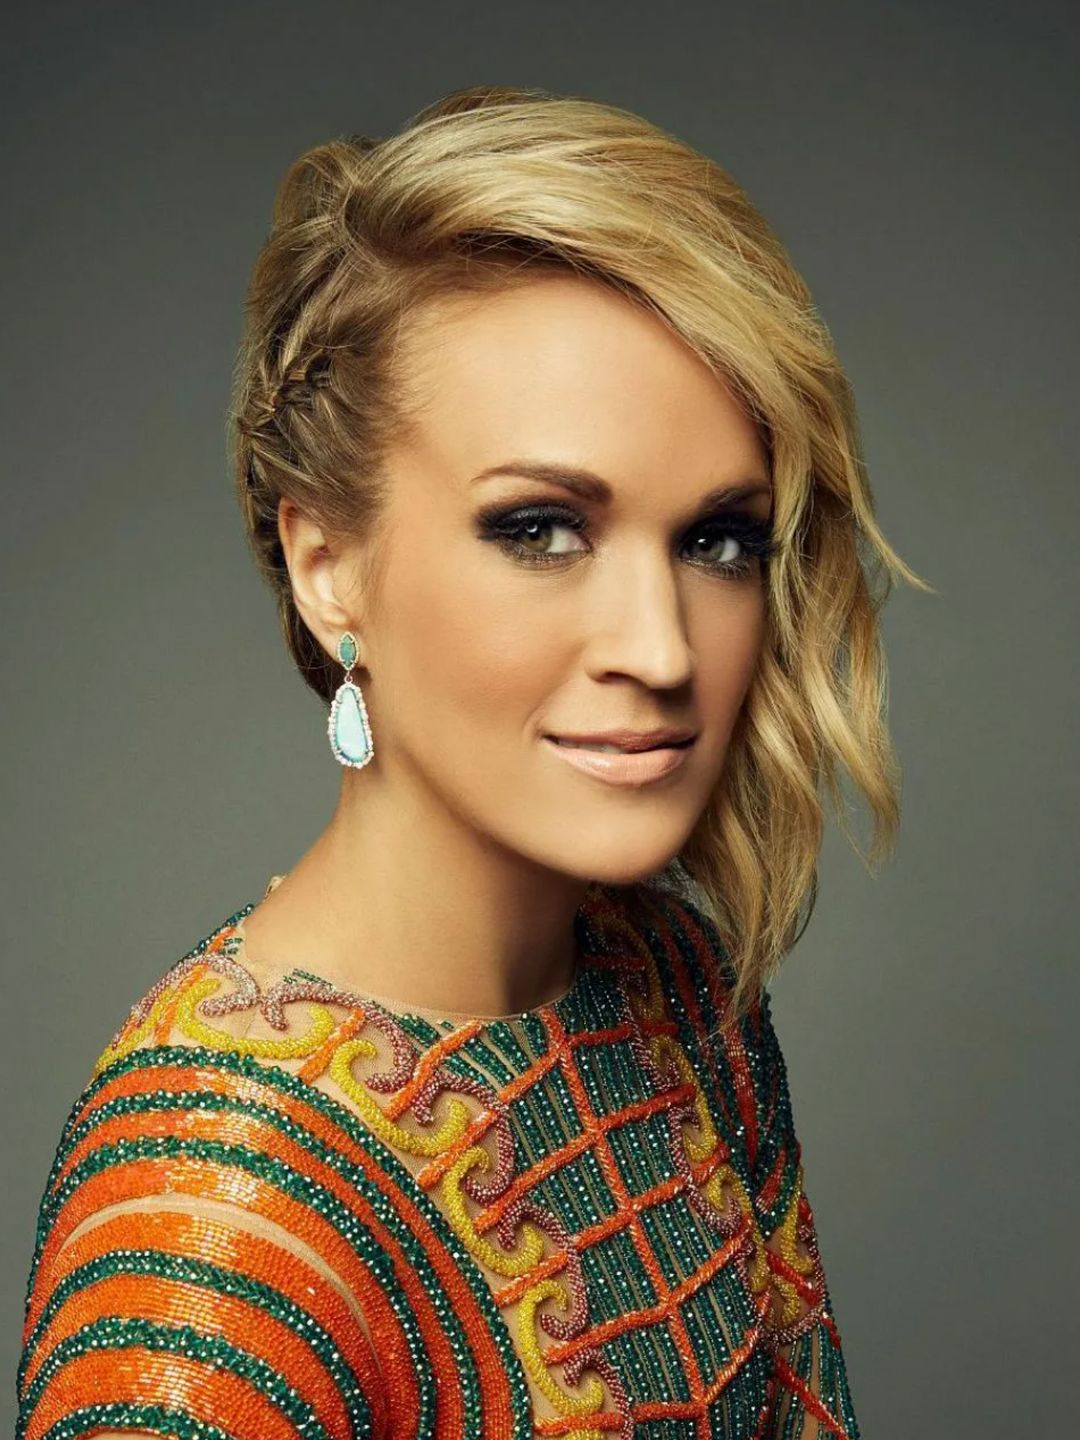 Carrie Underwood personal traits